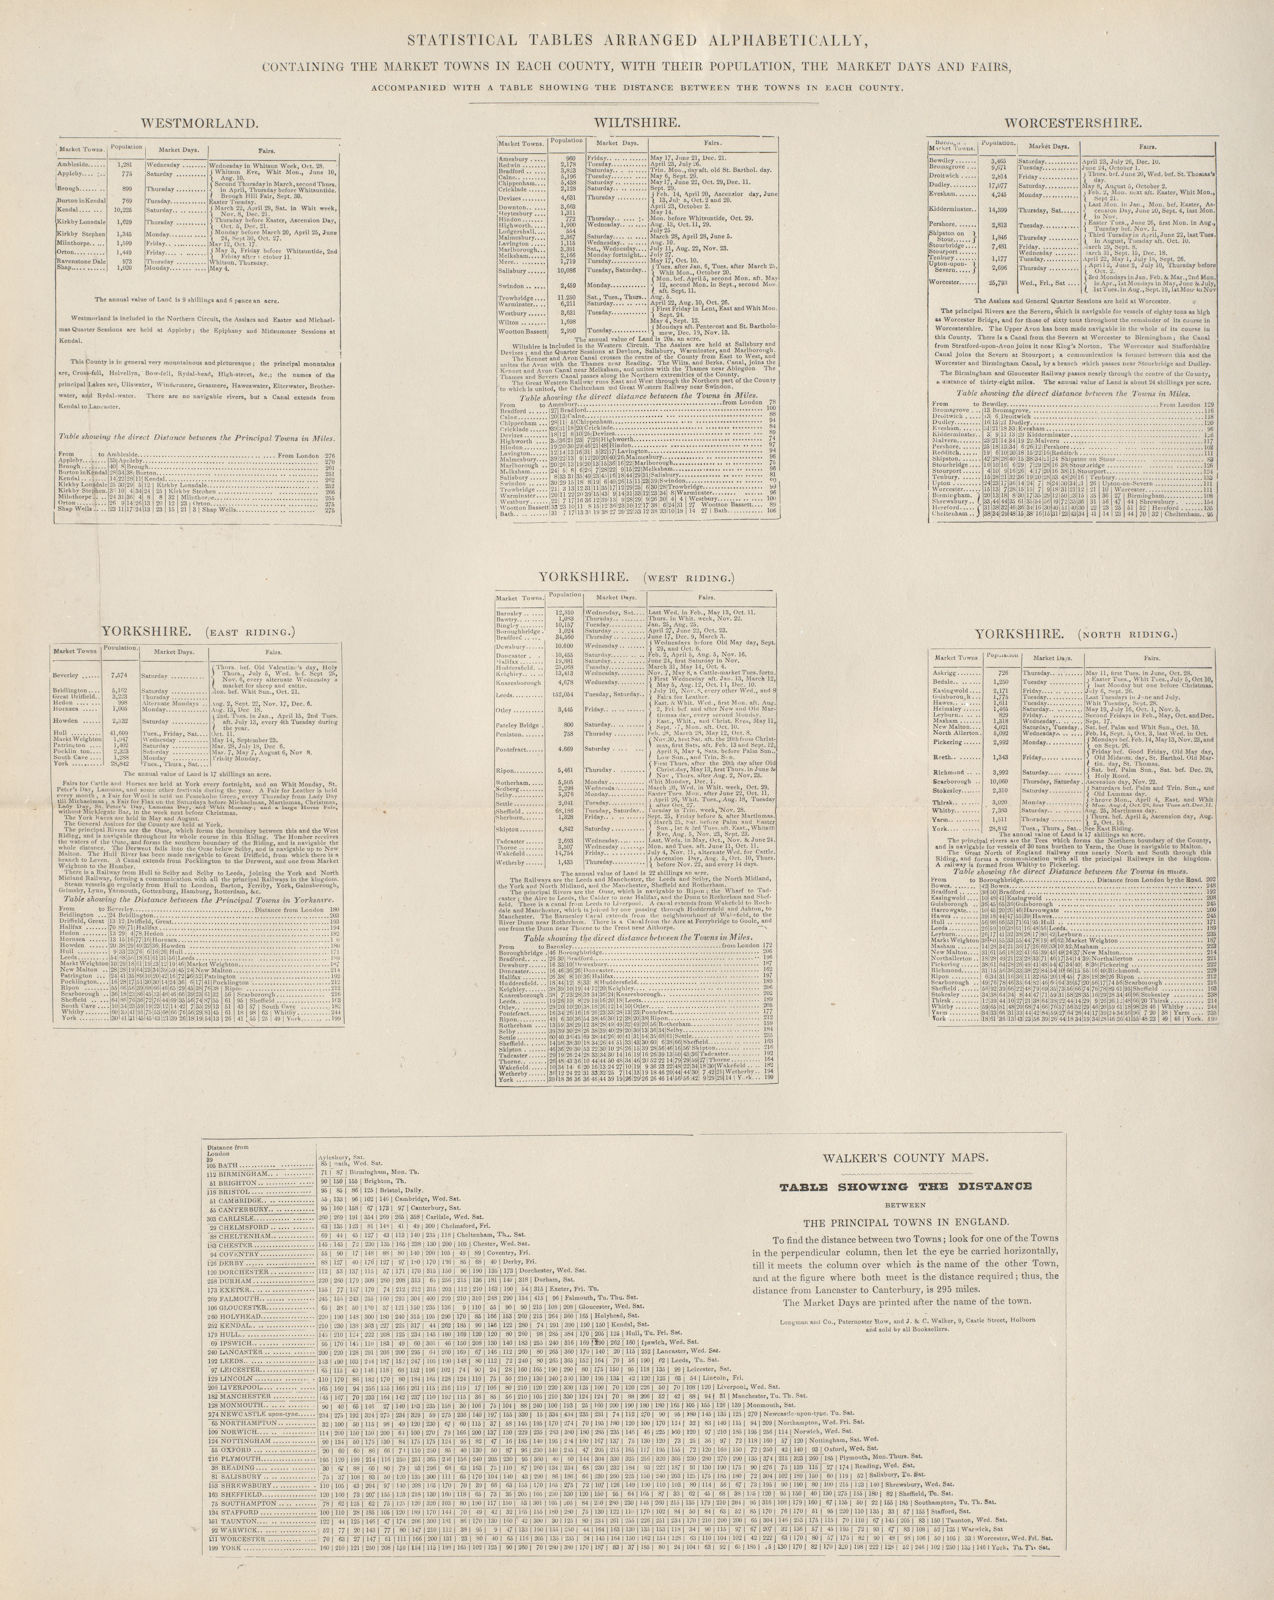 Market Towns, days, fairs & population by county. Westmorland-Yorkshire 1868